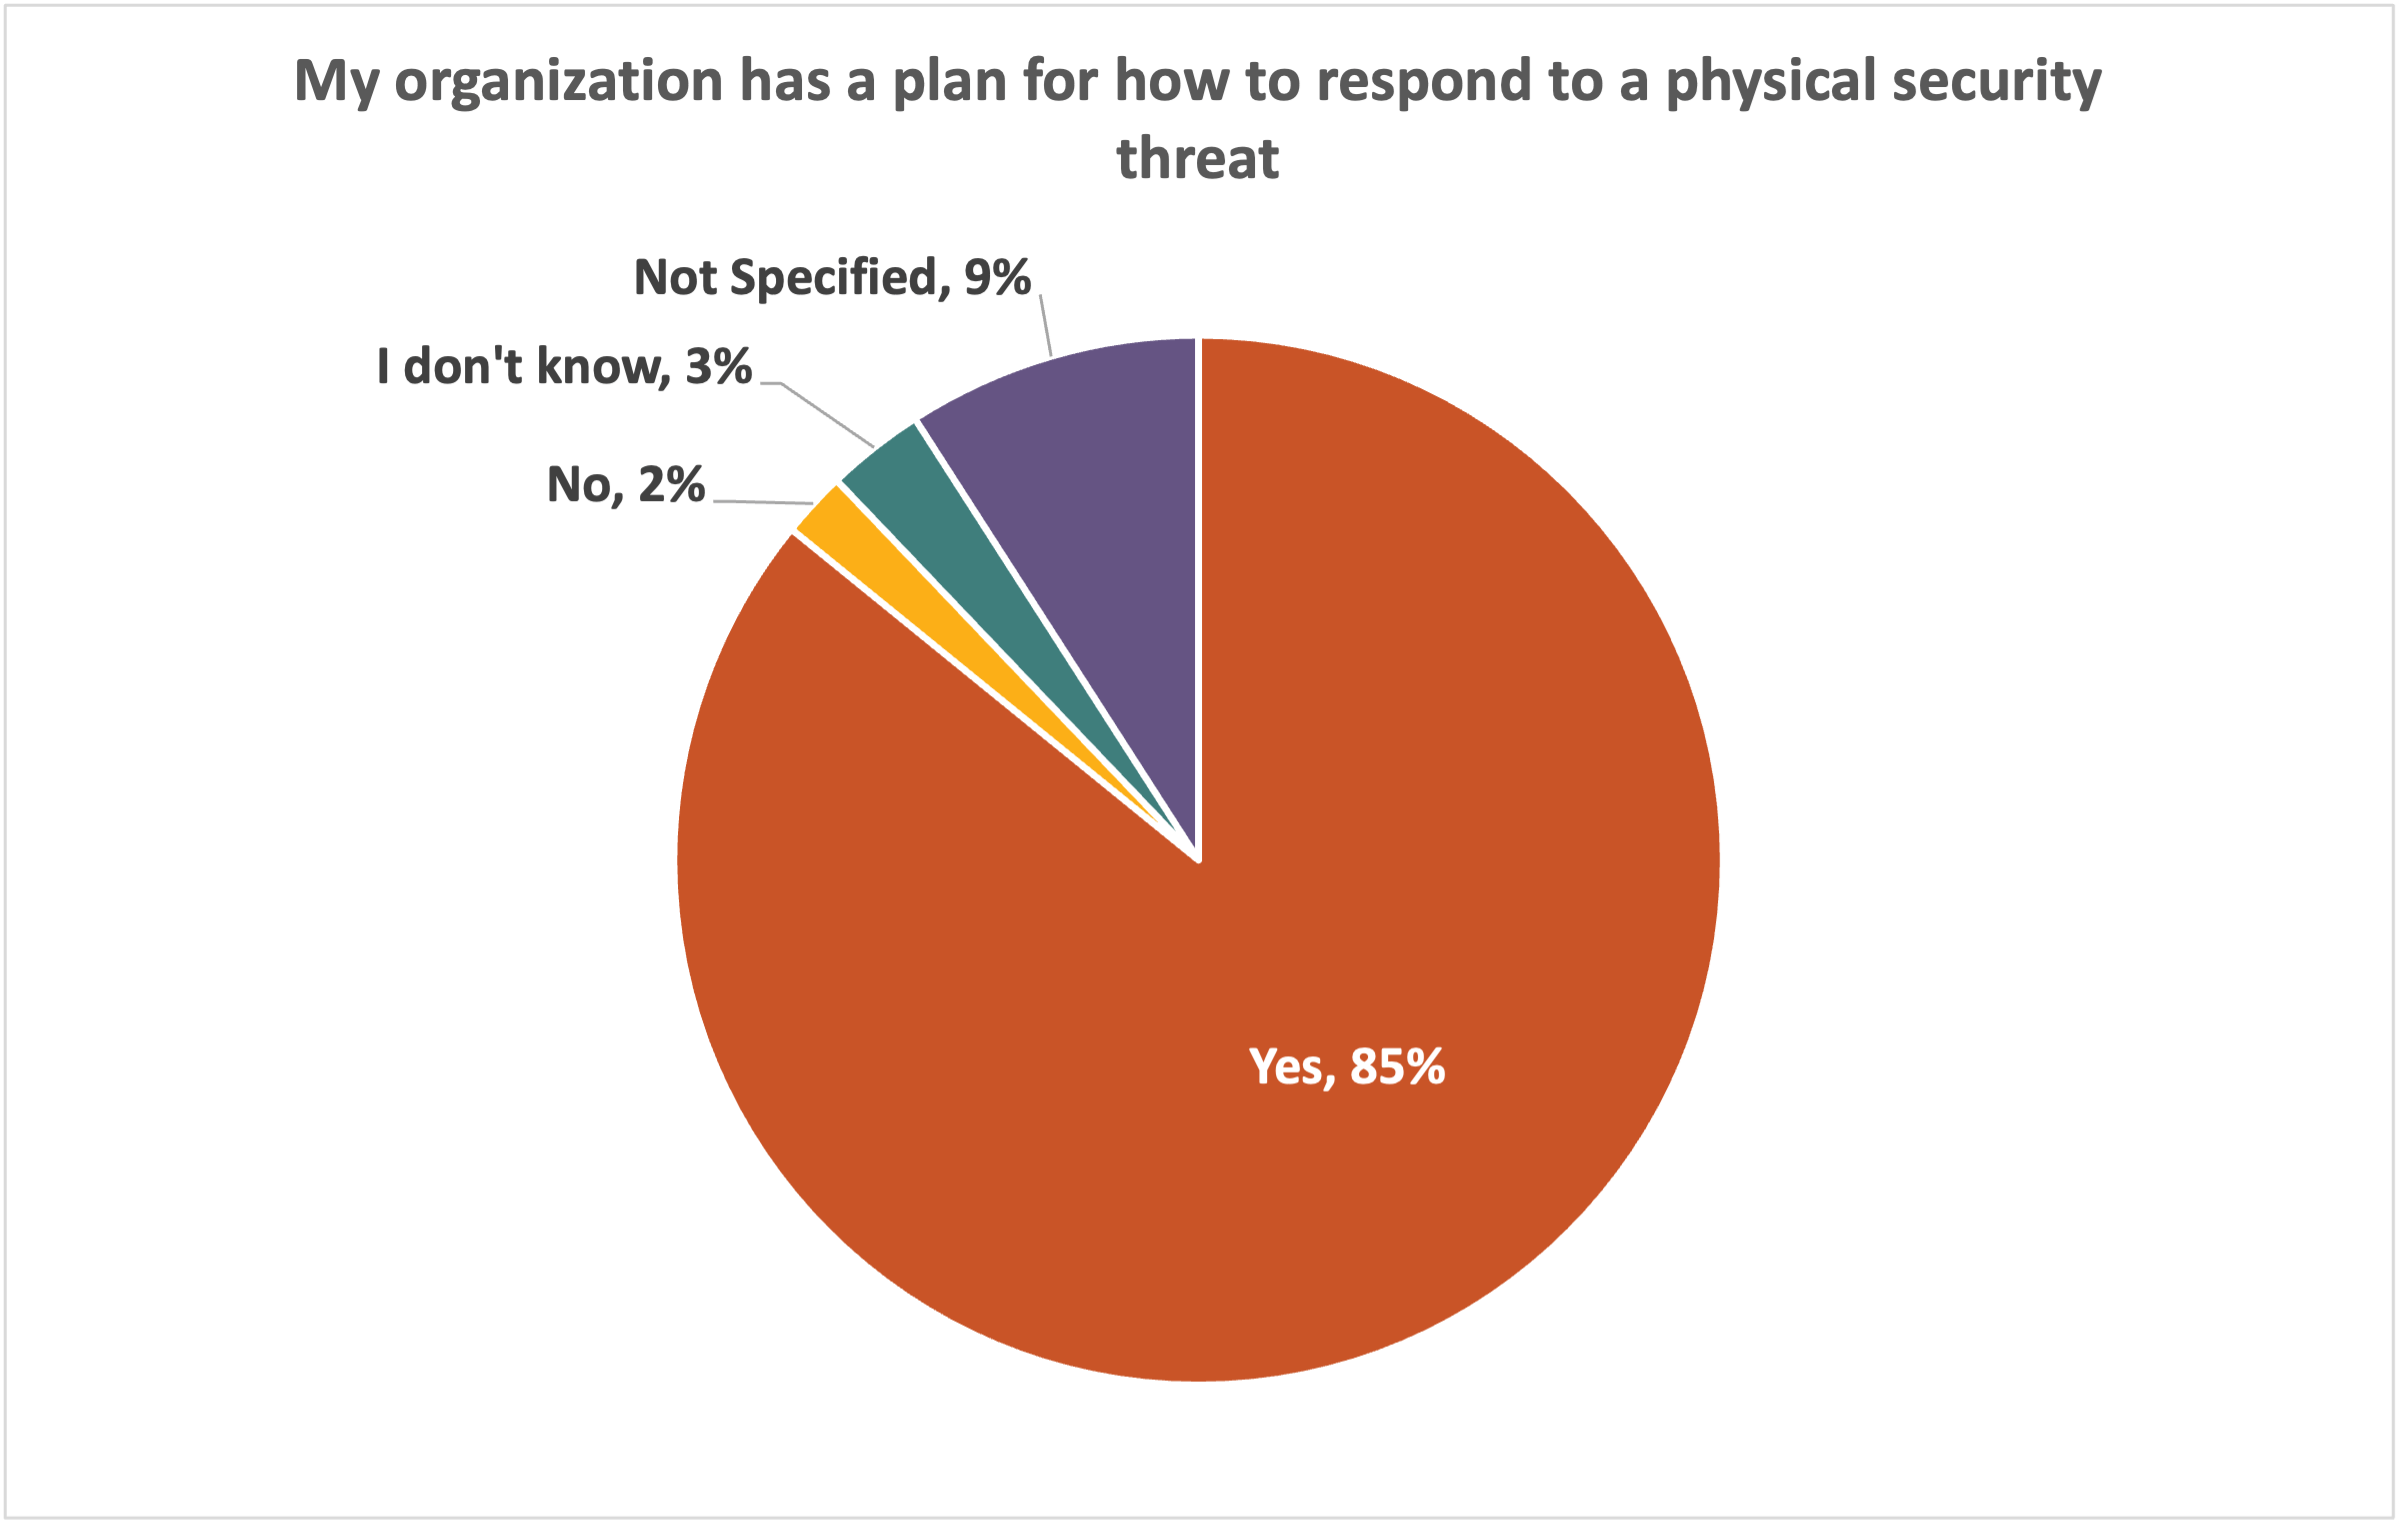 Chart of responses for the question "My organization has a plan for how to respond to a physical security threat." Yes: 85%. No: 2%. I don't know: 3%. Not specified: 9%.